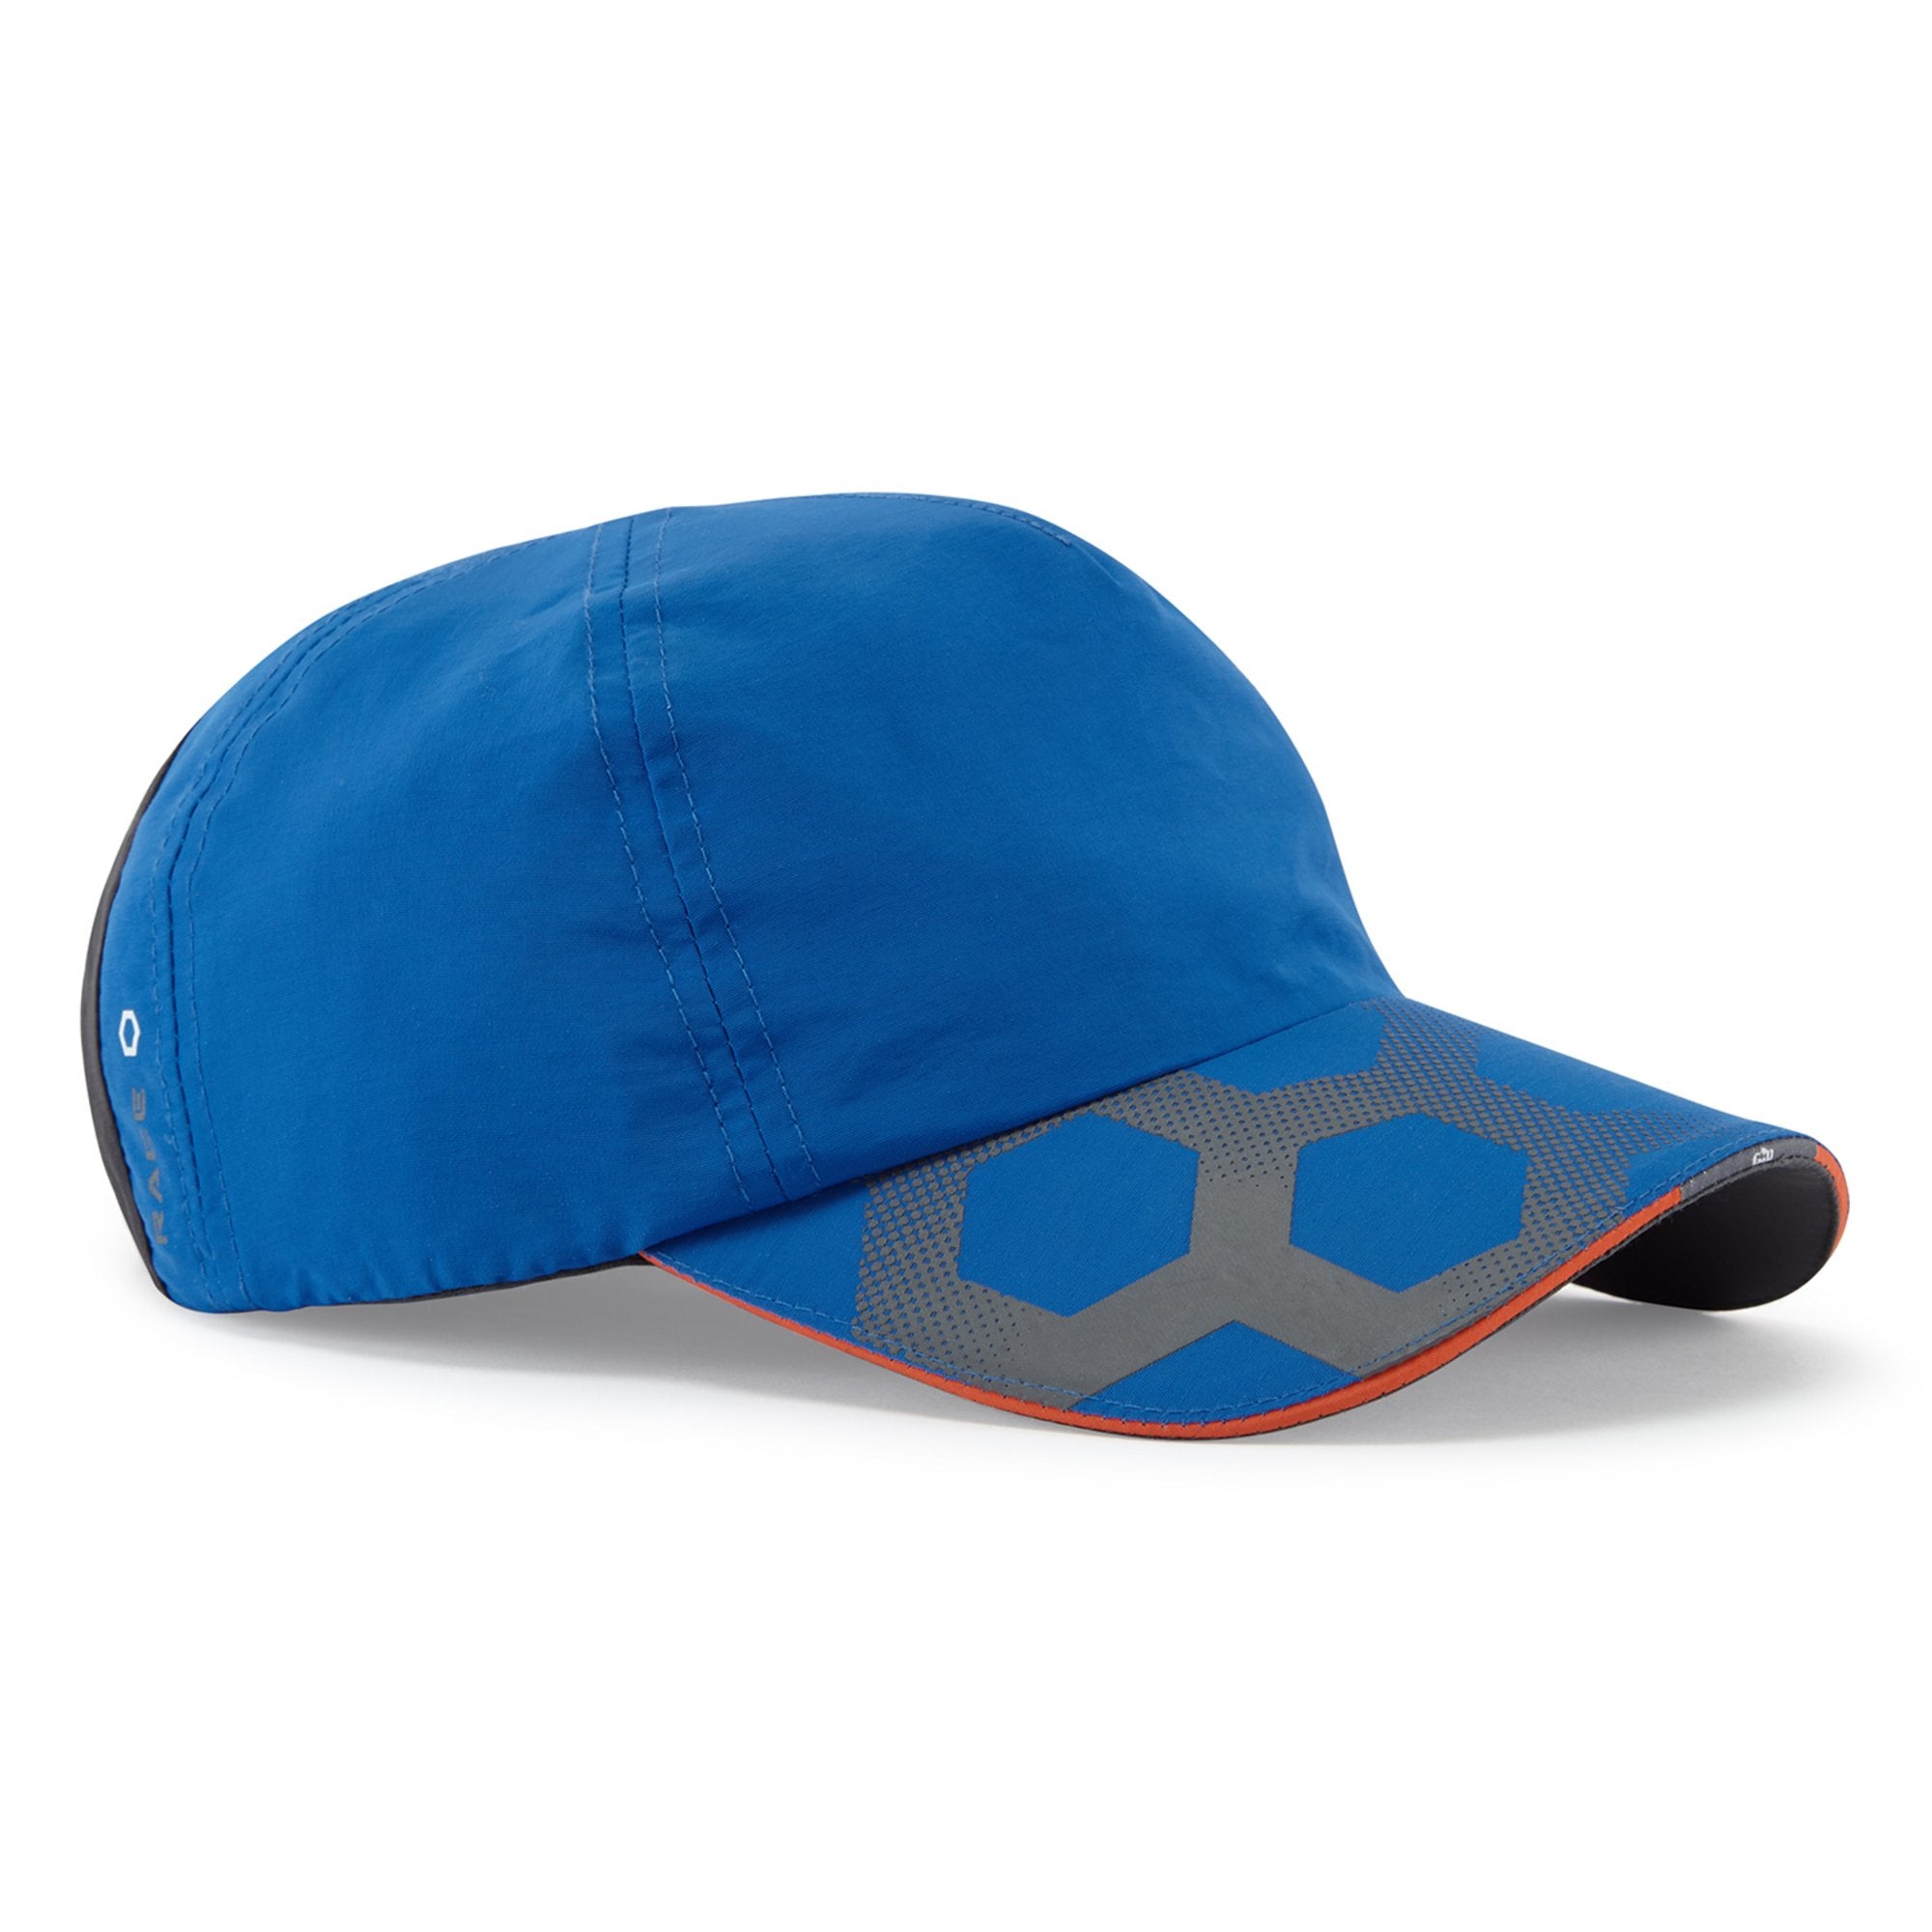 GILL Race Cap - One Size